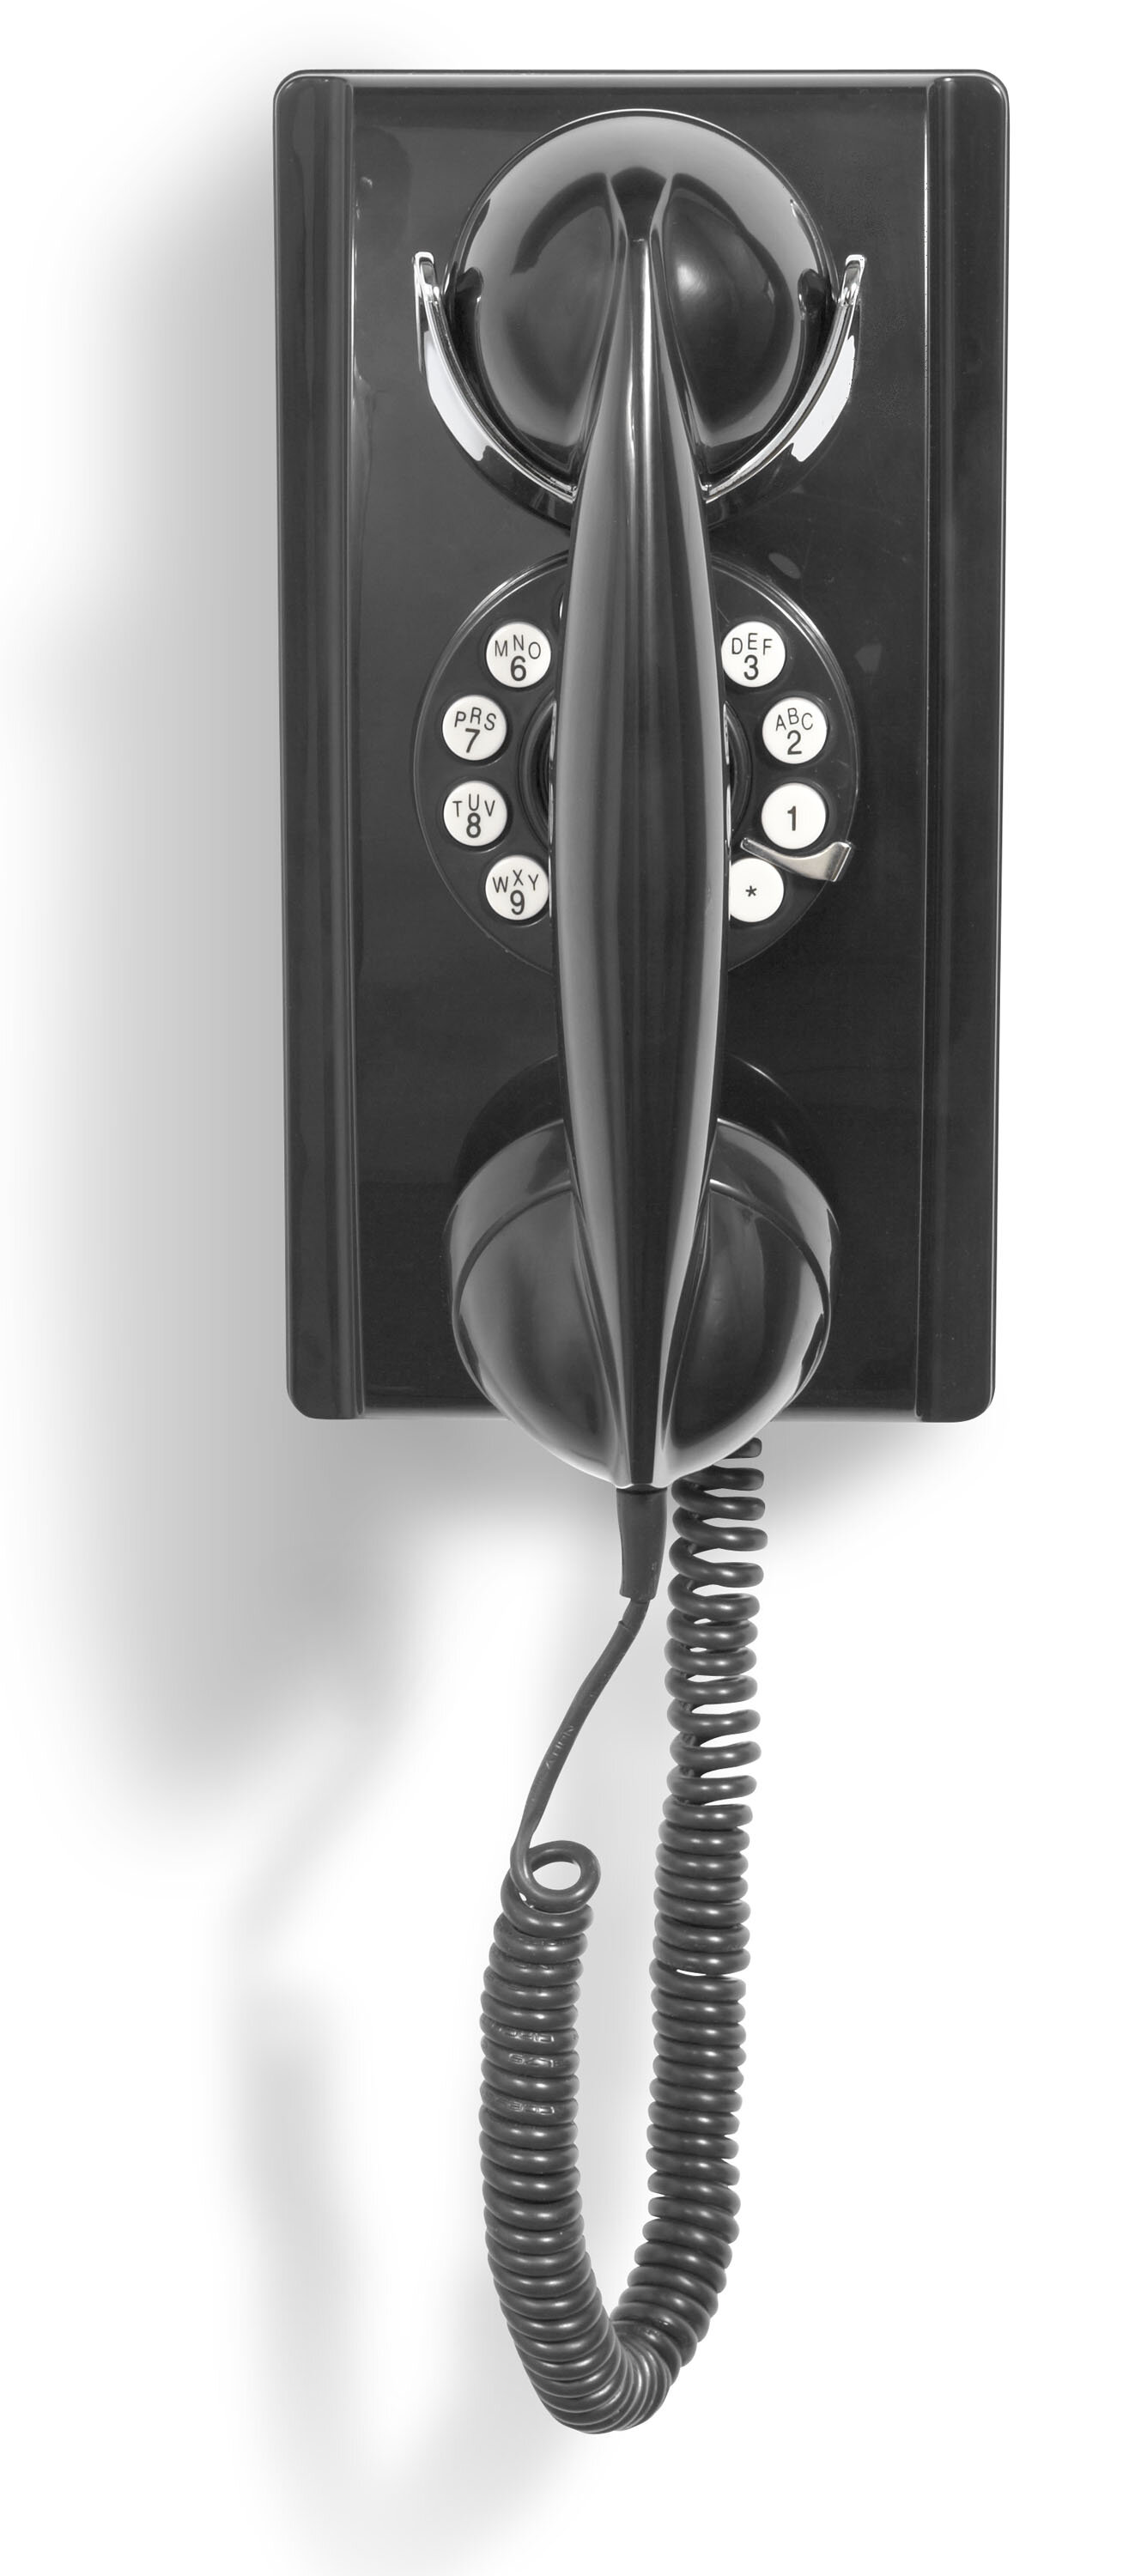 Wall Mounted Rotary Dial Corded Telephone